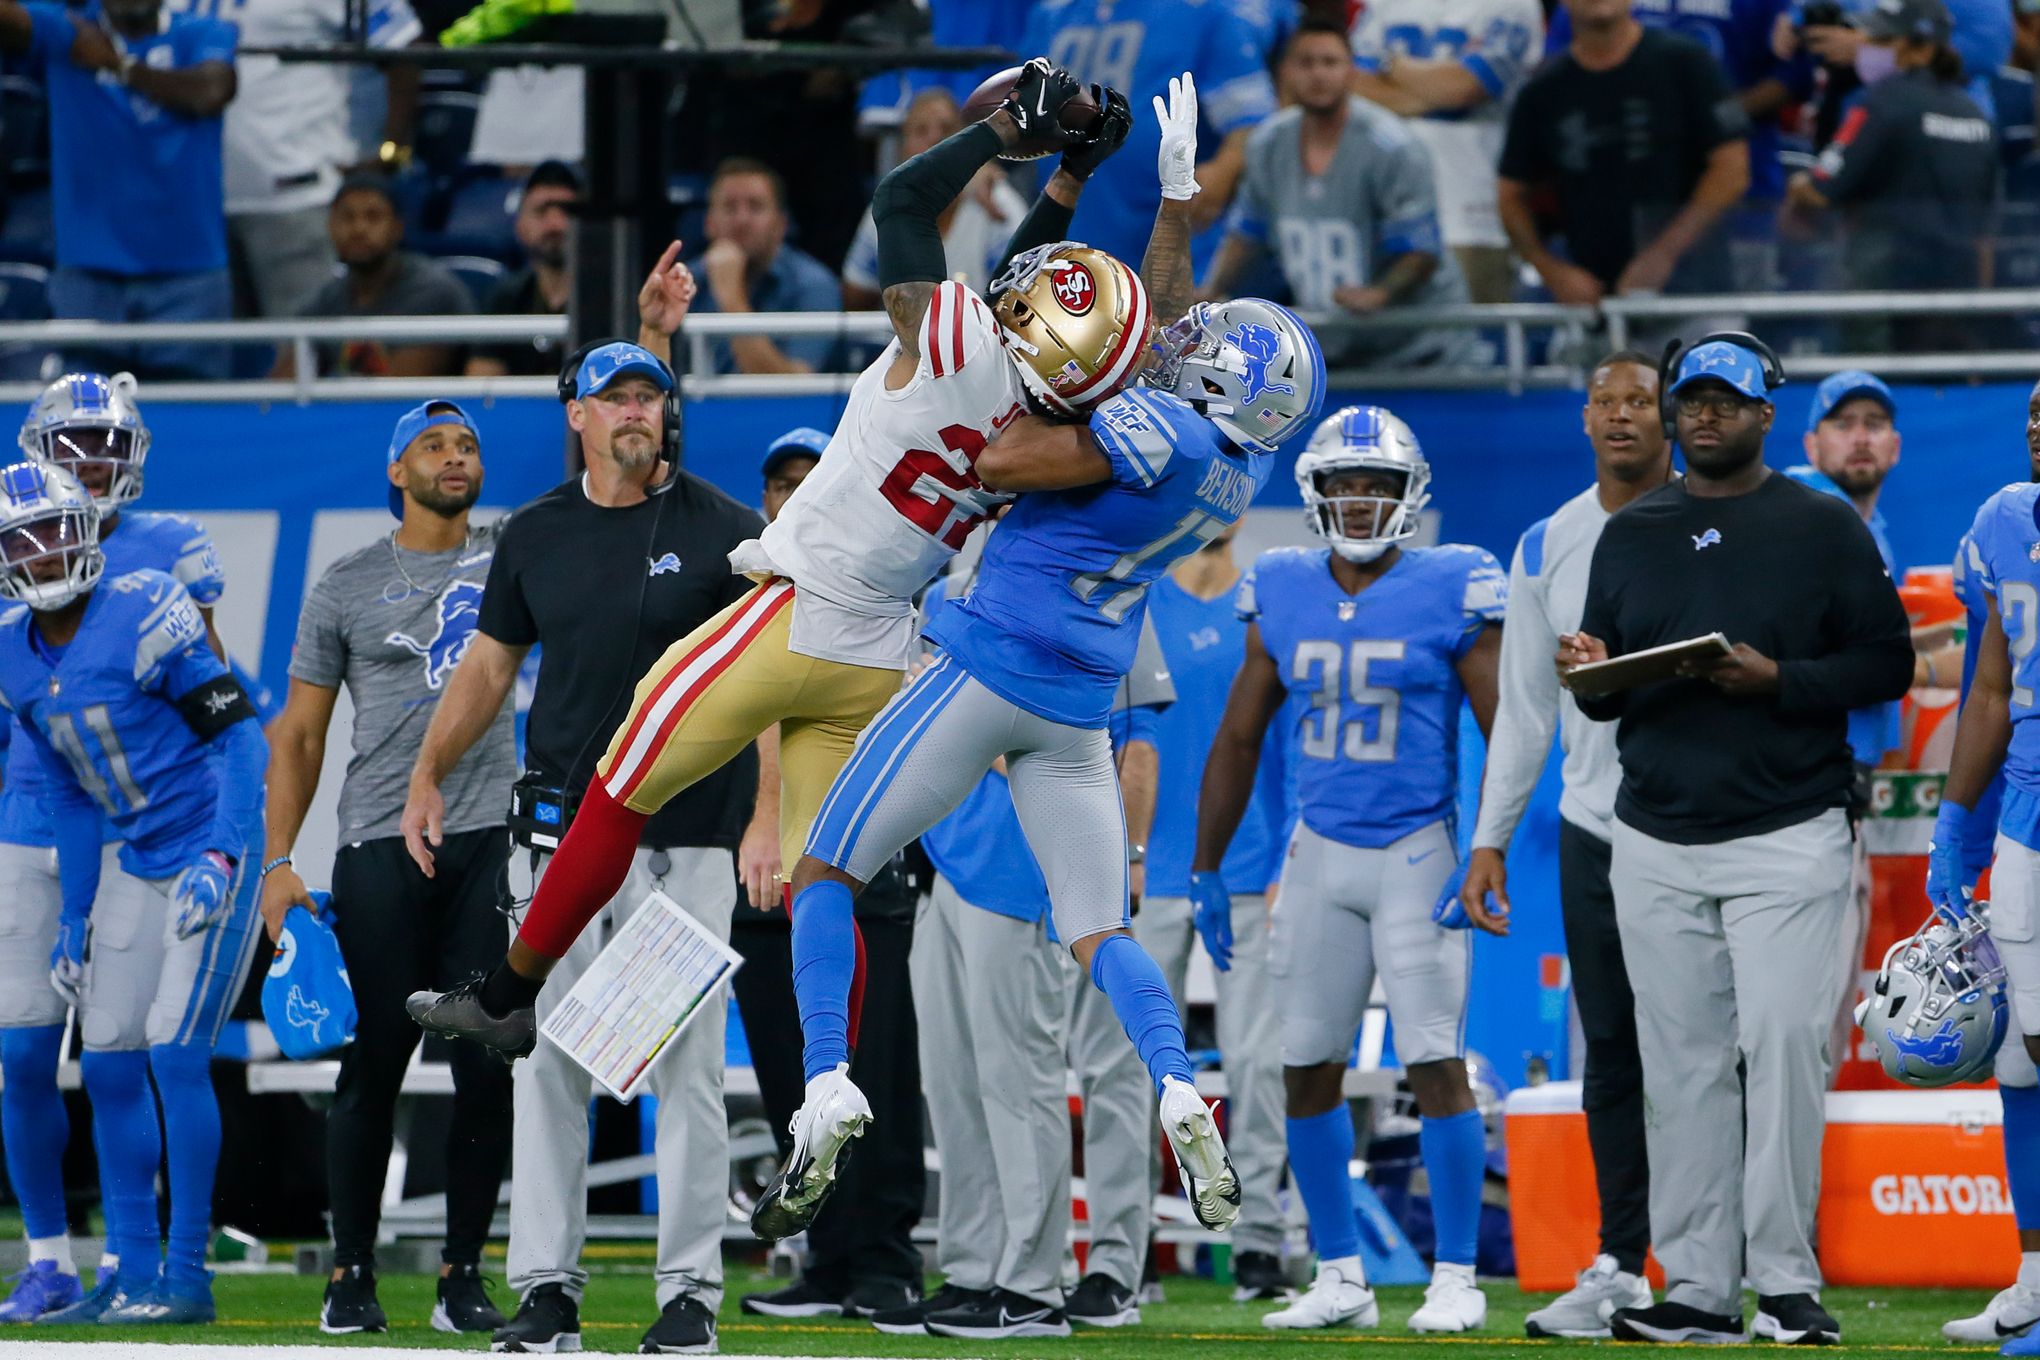 San Francisco 49ers rookie Trey Lance throws touchdown pass on first NFL  pass attempt against Detroit Lions 